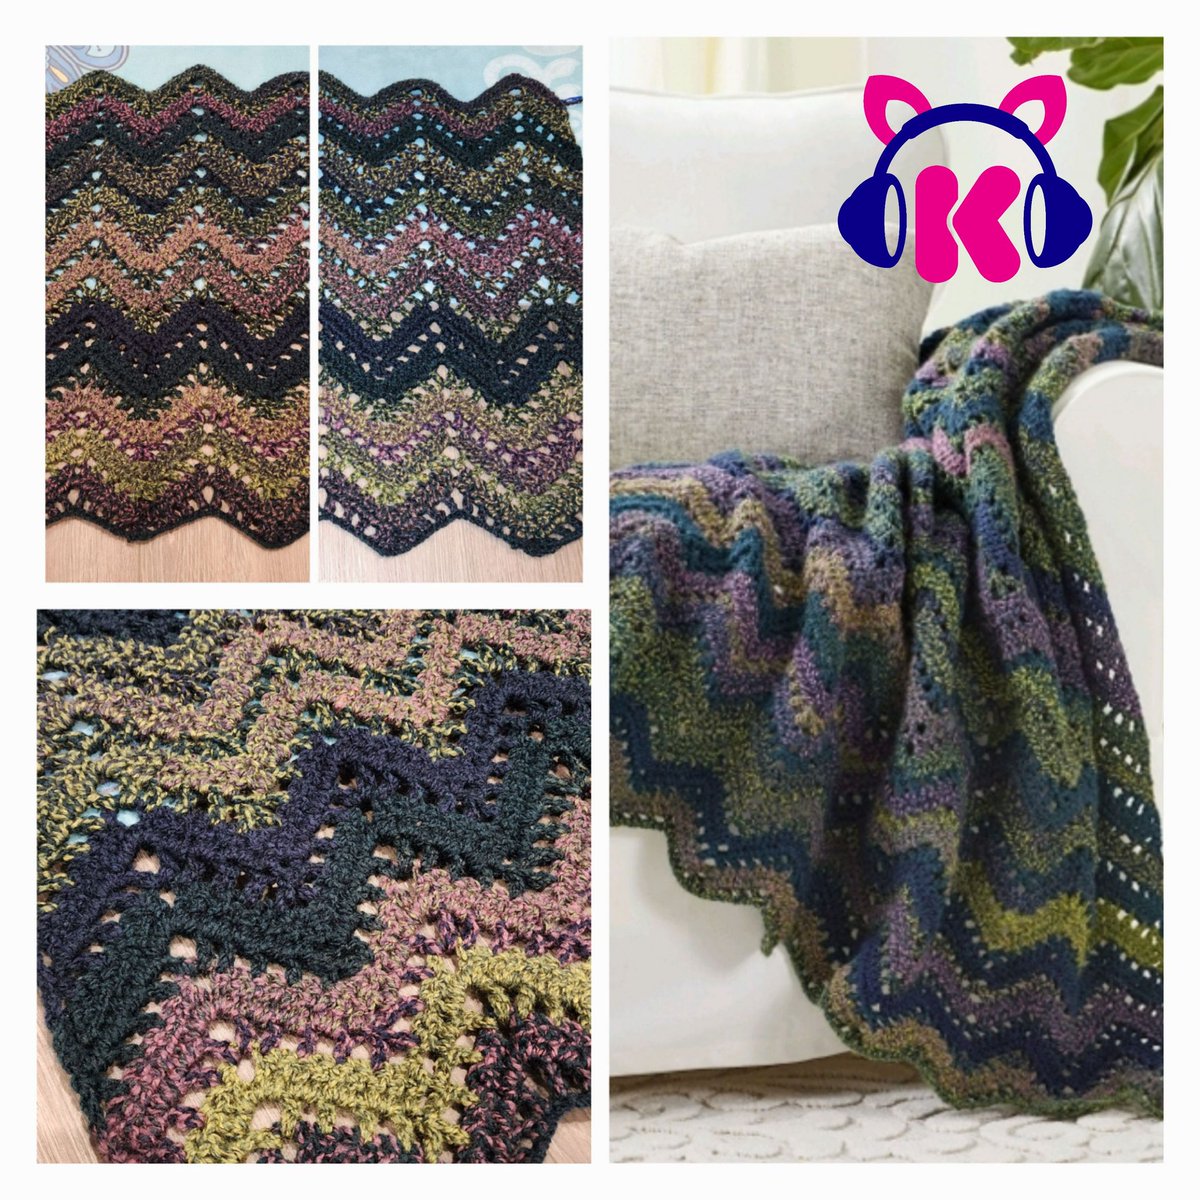 Chevron! I struggled at first, but back on track. Now 1/4 I really love it & I excited to have this beauty on my couch!

Crafters: when you learn a pattern, are their tips you use to help yourself 'get it' faster?

#neverstoplearning
#DaretobeDifferent
#crochetnoob
@premieryarns